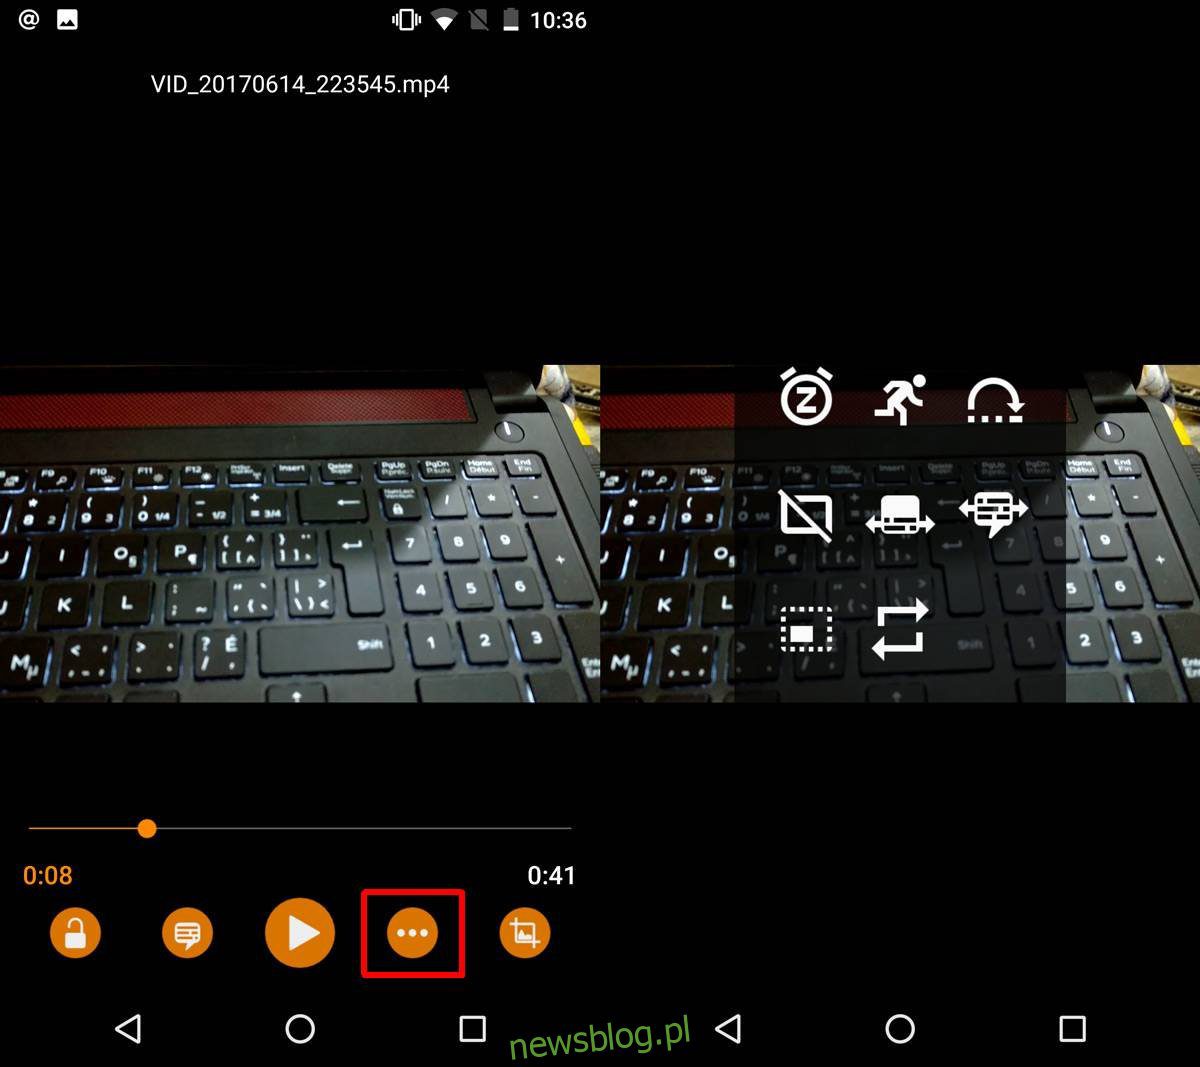 Cách bật VLC Picture In Picture View trên Android